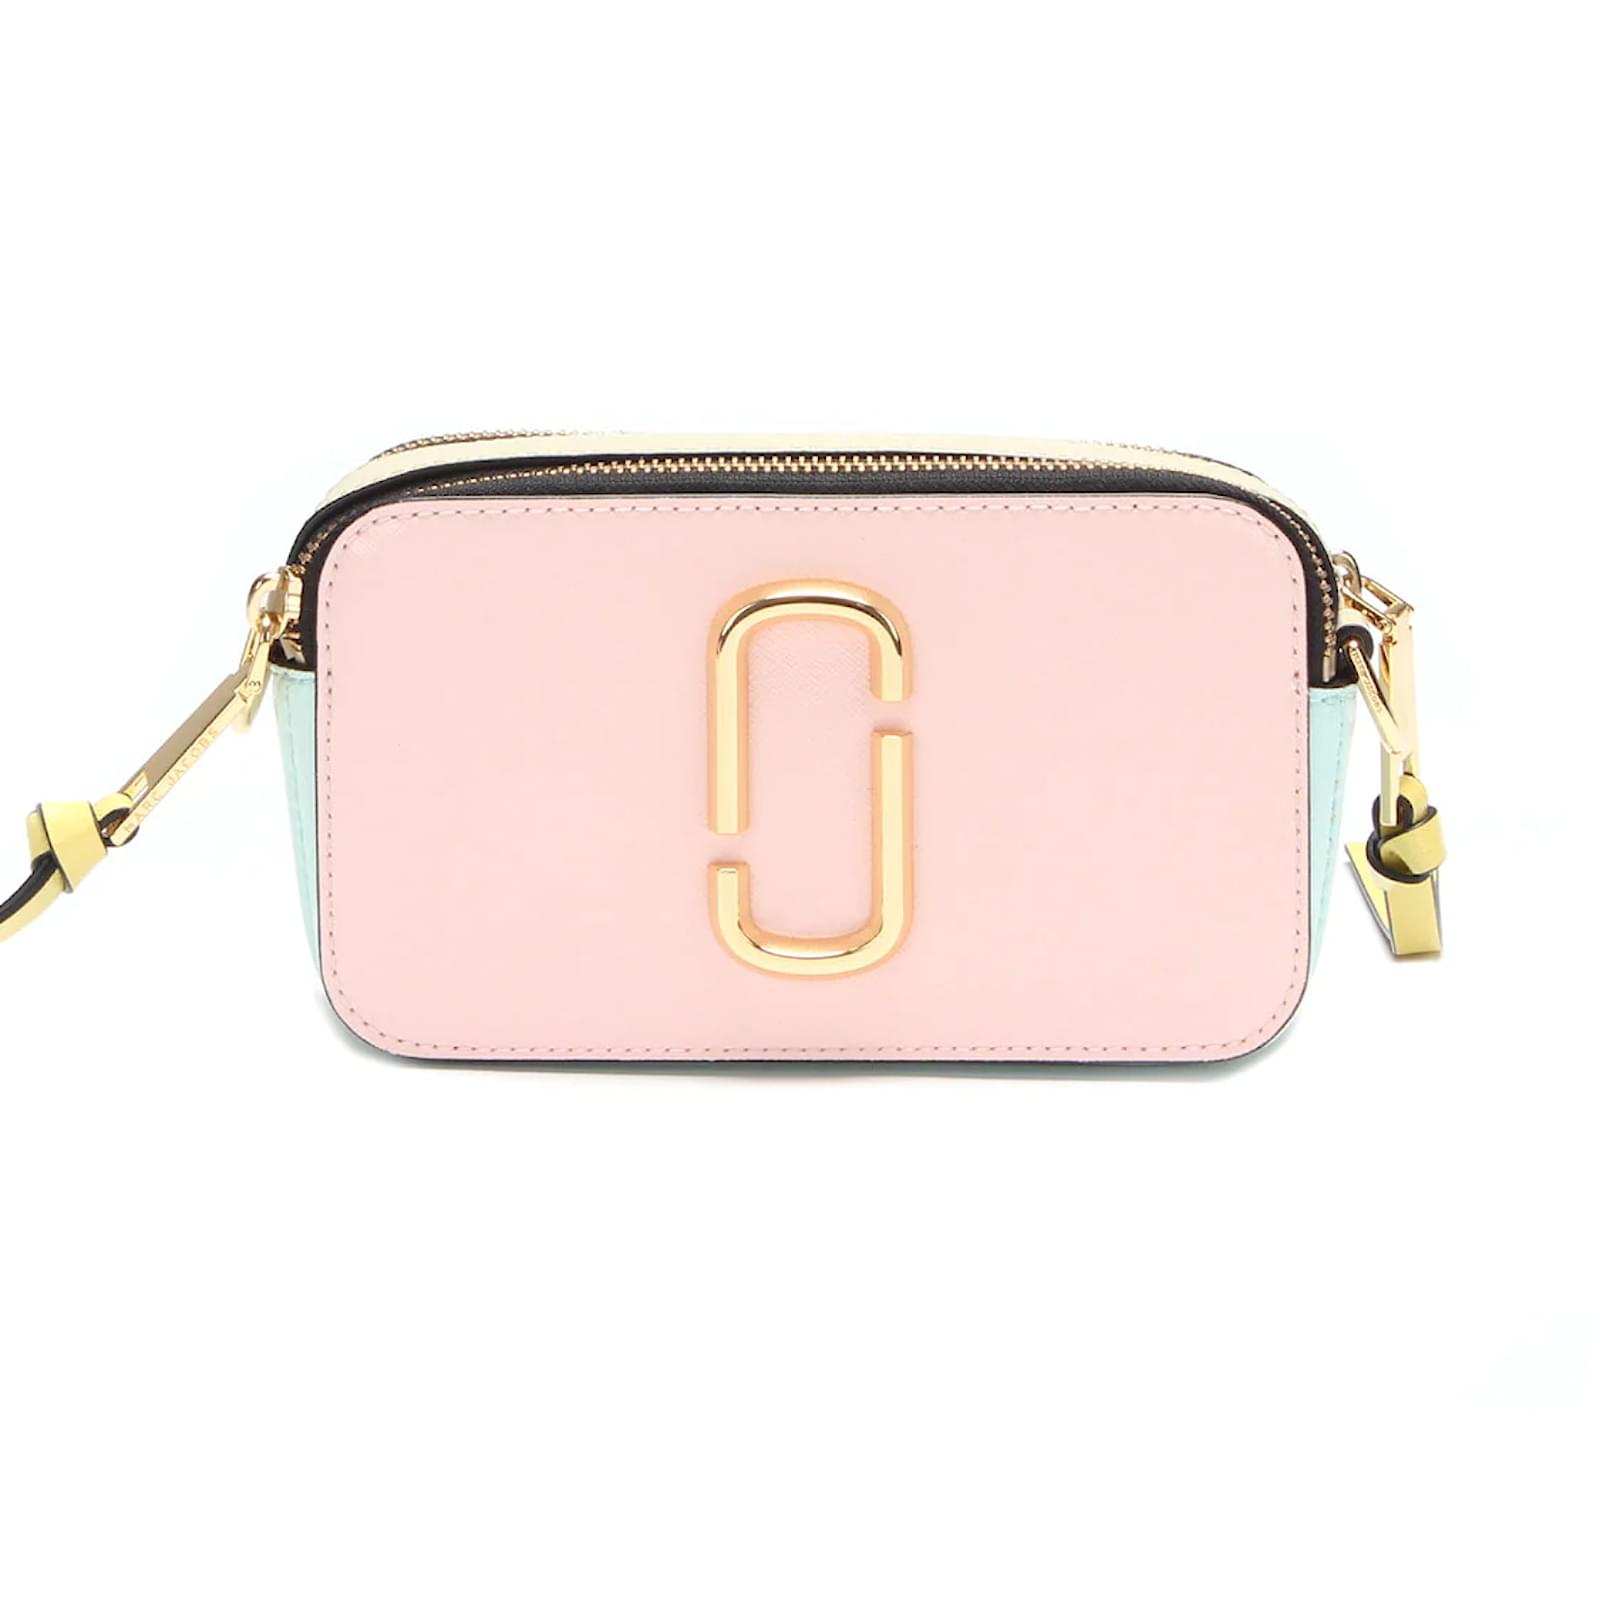 style marc jacobs camera bag